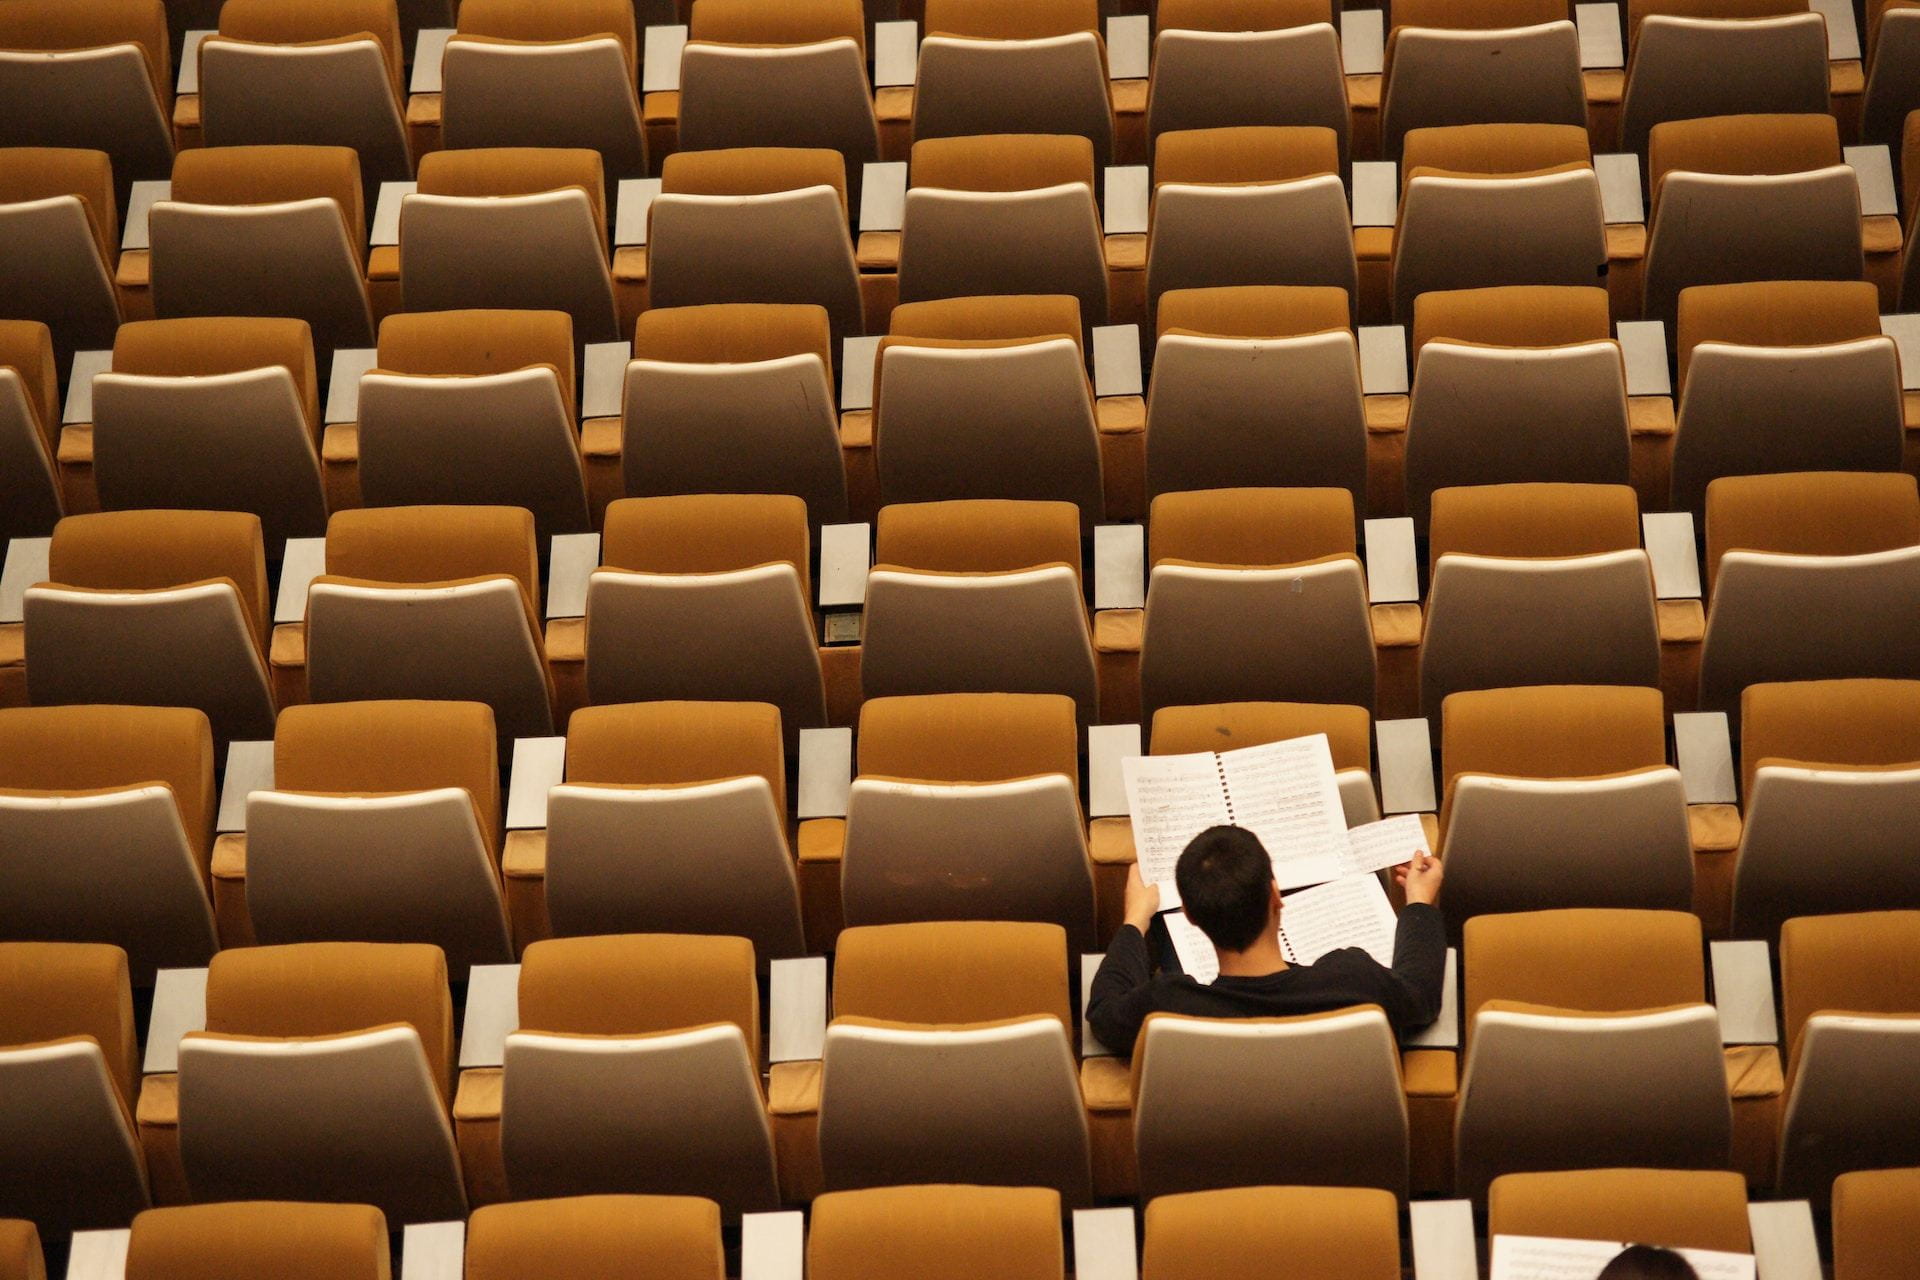 Aerial view of a man sitting alone in rows of lecture seating.